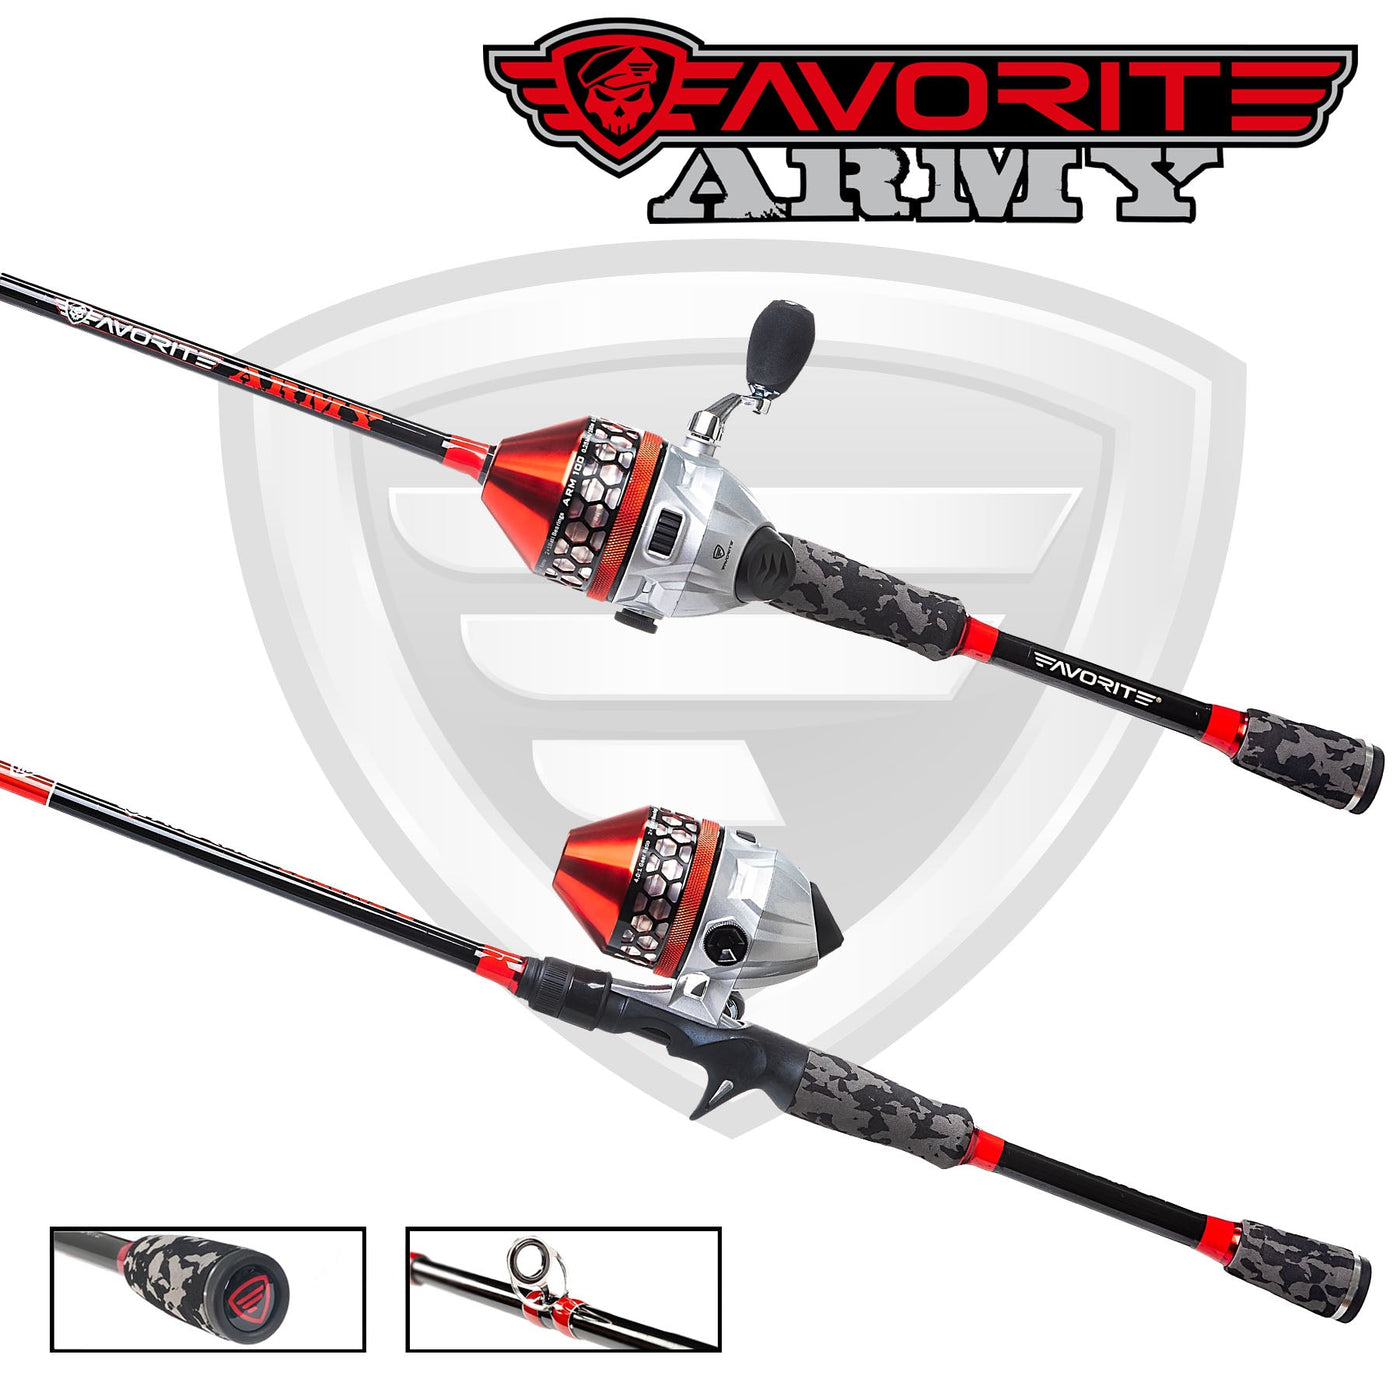 Favorite Army Spincast Combo, 2pc Favorite Fishing